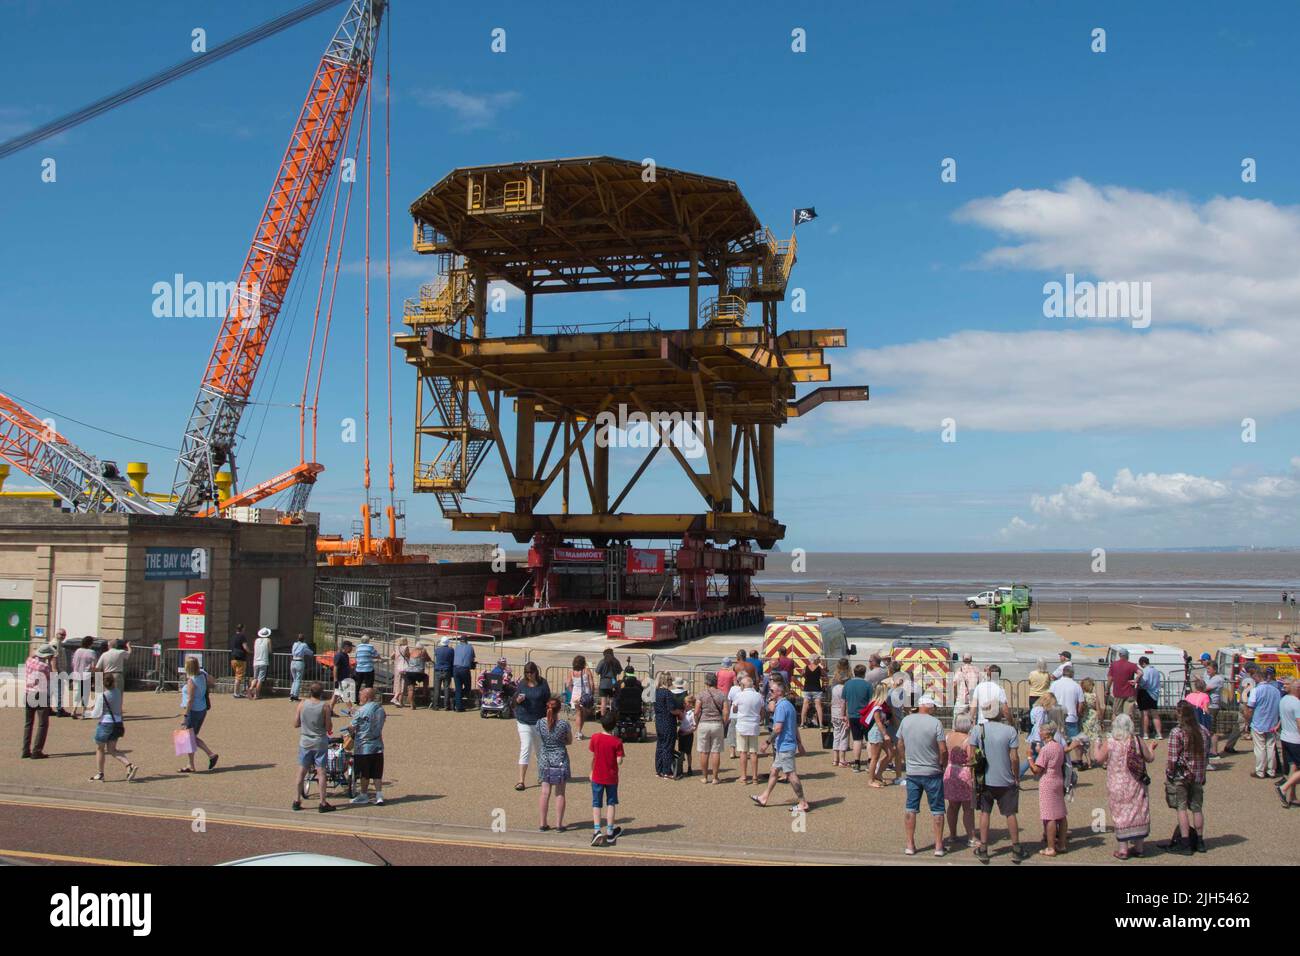 Weston-super-Mare, Somerset, UK.  15th July 2022.  The 25 meter tall North Sea platform, turned art installation called the See Monster being readied on the beach at Weston-Super-Mare in Somerset for it to be lifted on to its already installed legs next to the Tropicana.  A large crowd is building on the seafront awaiting the lift which is expected to happen today.  Picture Credit: Graham Hunt/Alamy Live News Stock Photo